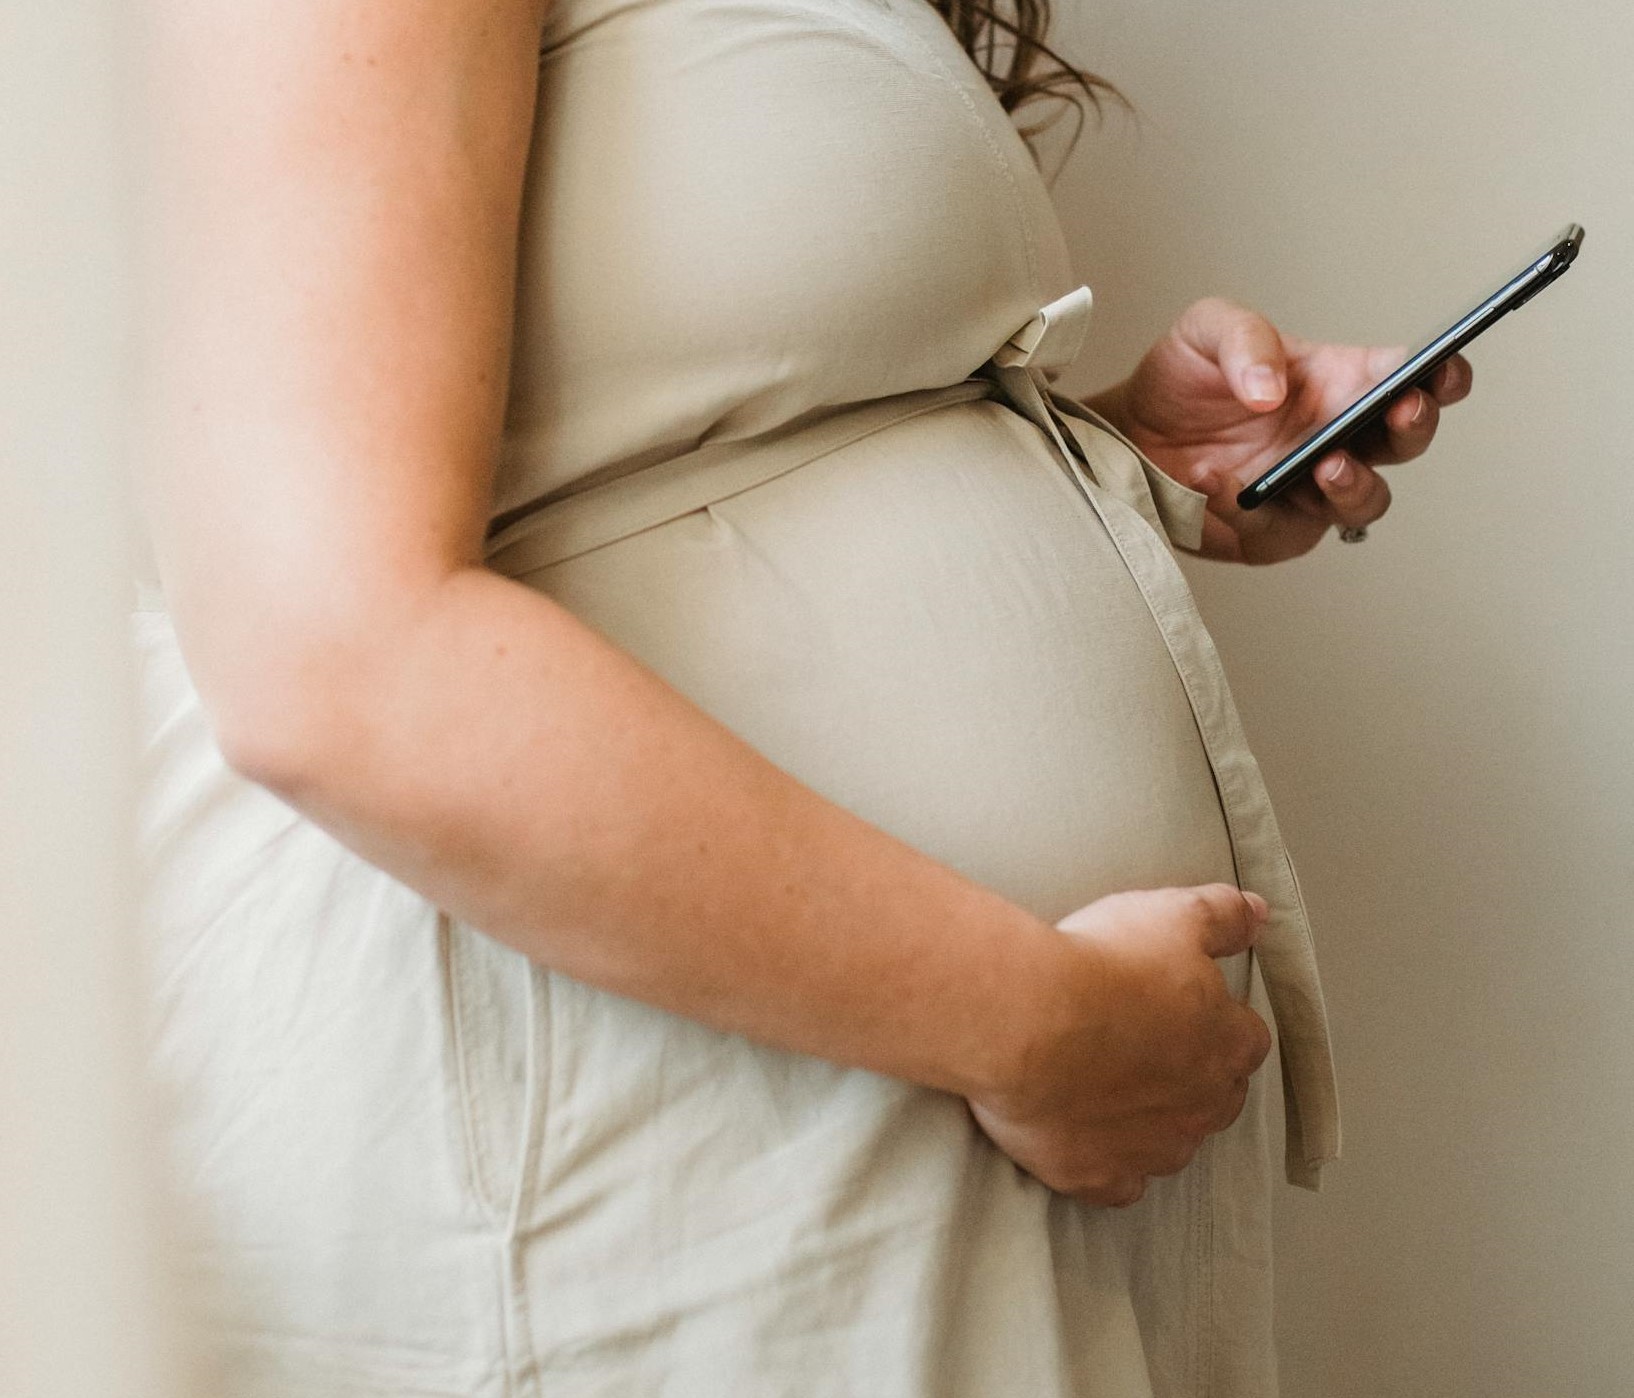 A pregnant woman seeing her phone | Source: Pexels